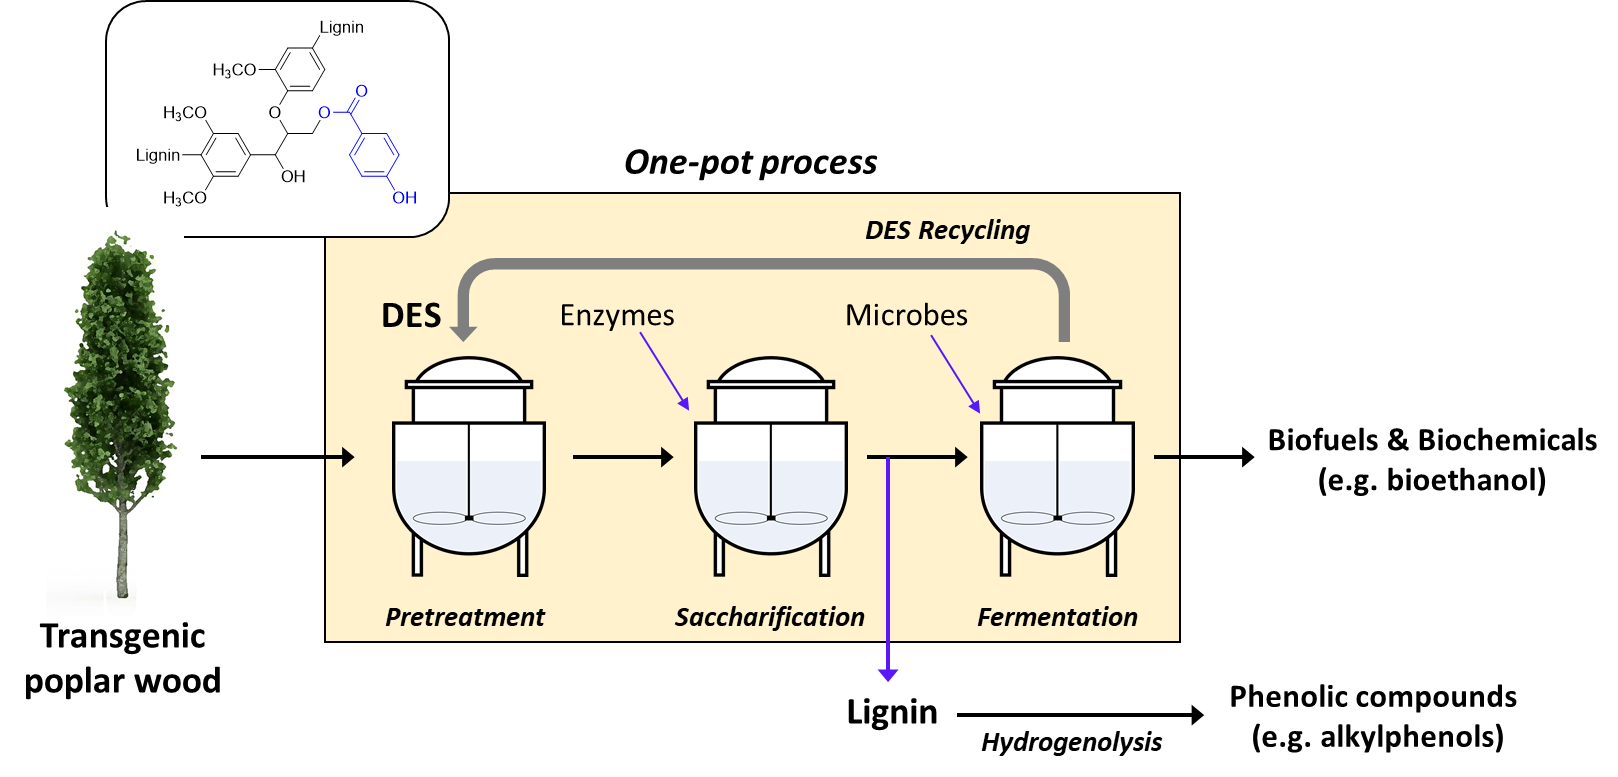 One-pot process for producing biofuels and biochemicals from biomass using environmentally friendly eutectic solvents